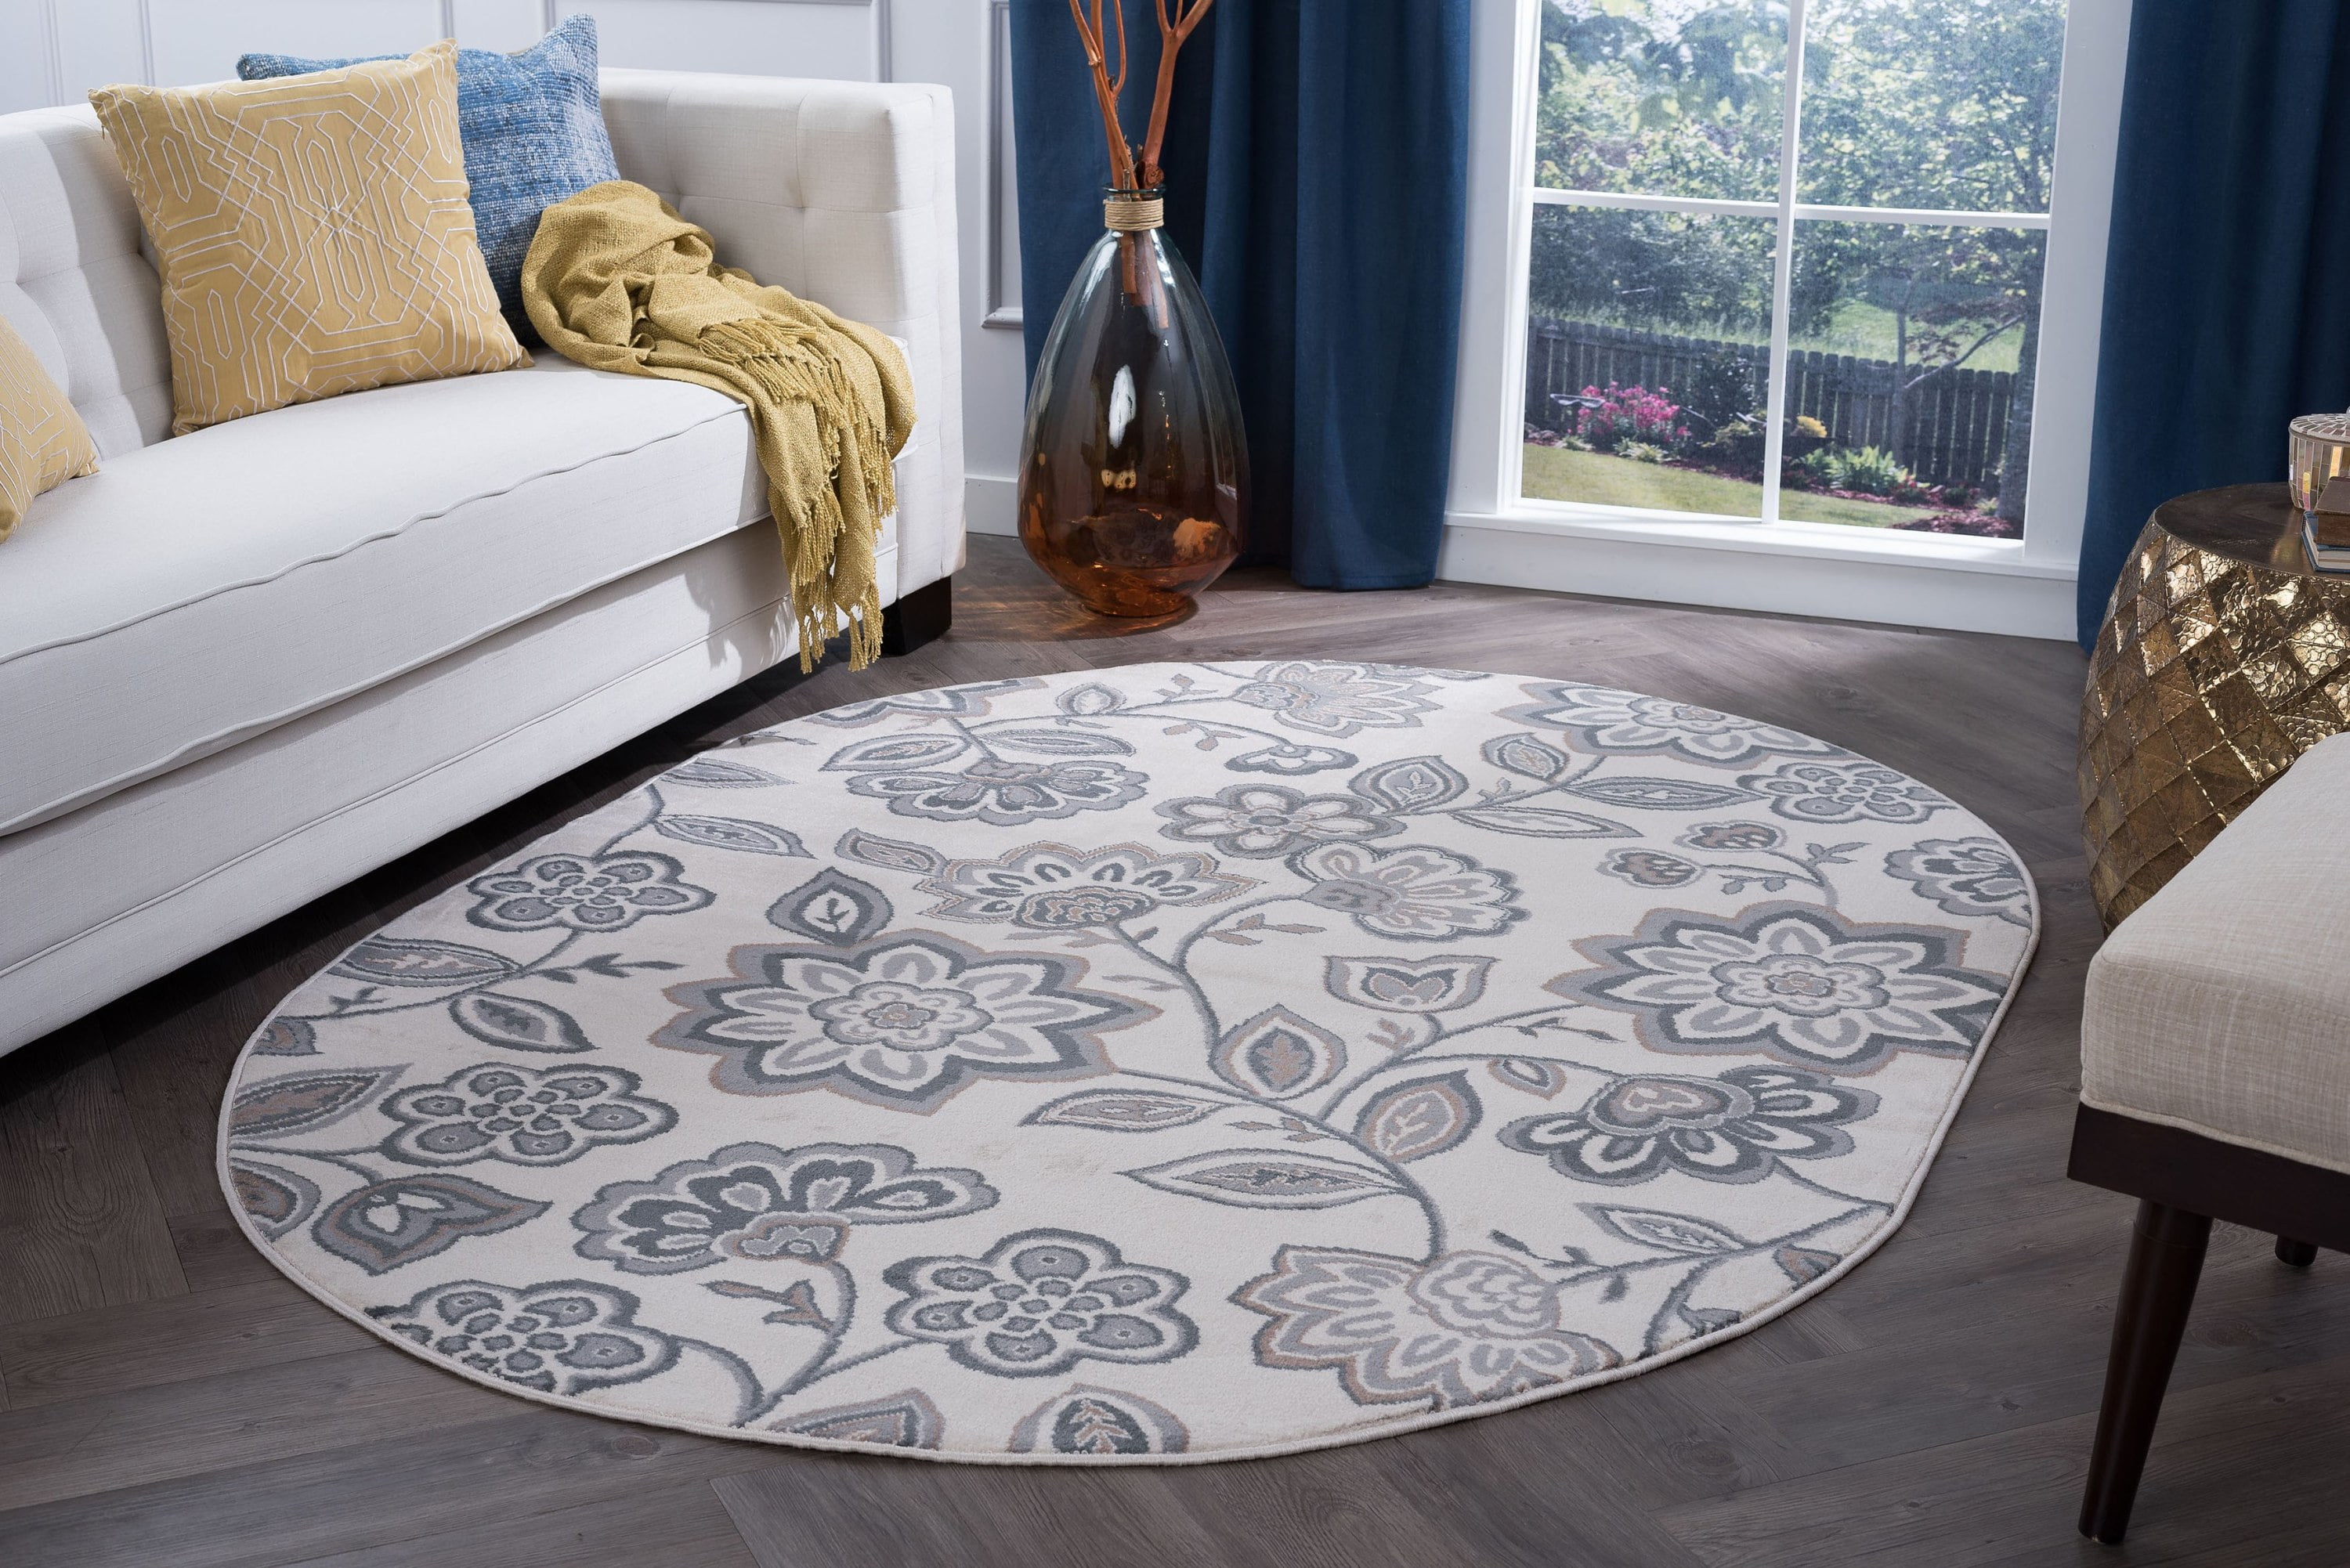 Large Oval Rugs For Dining Room